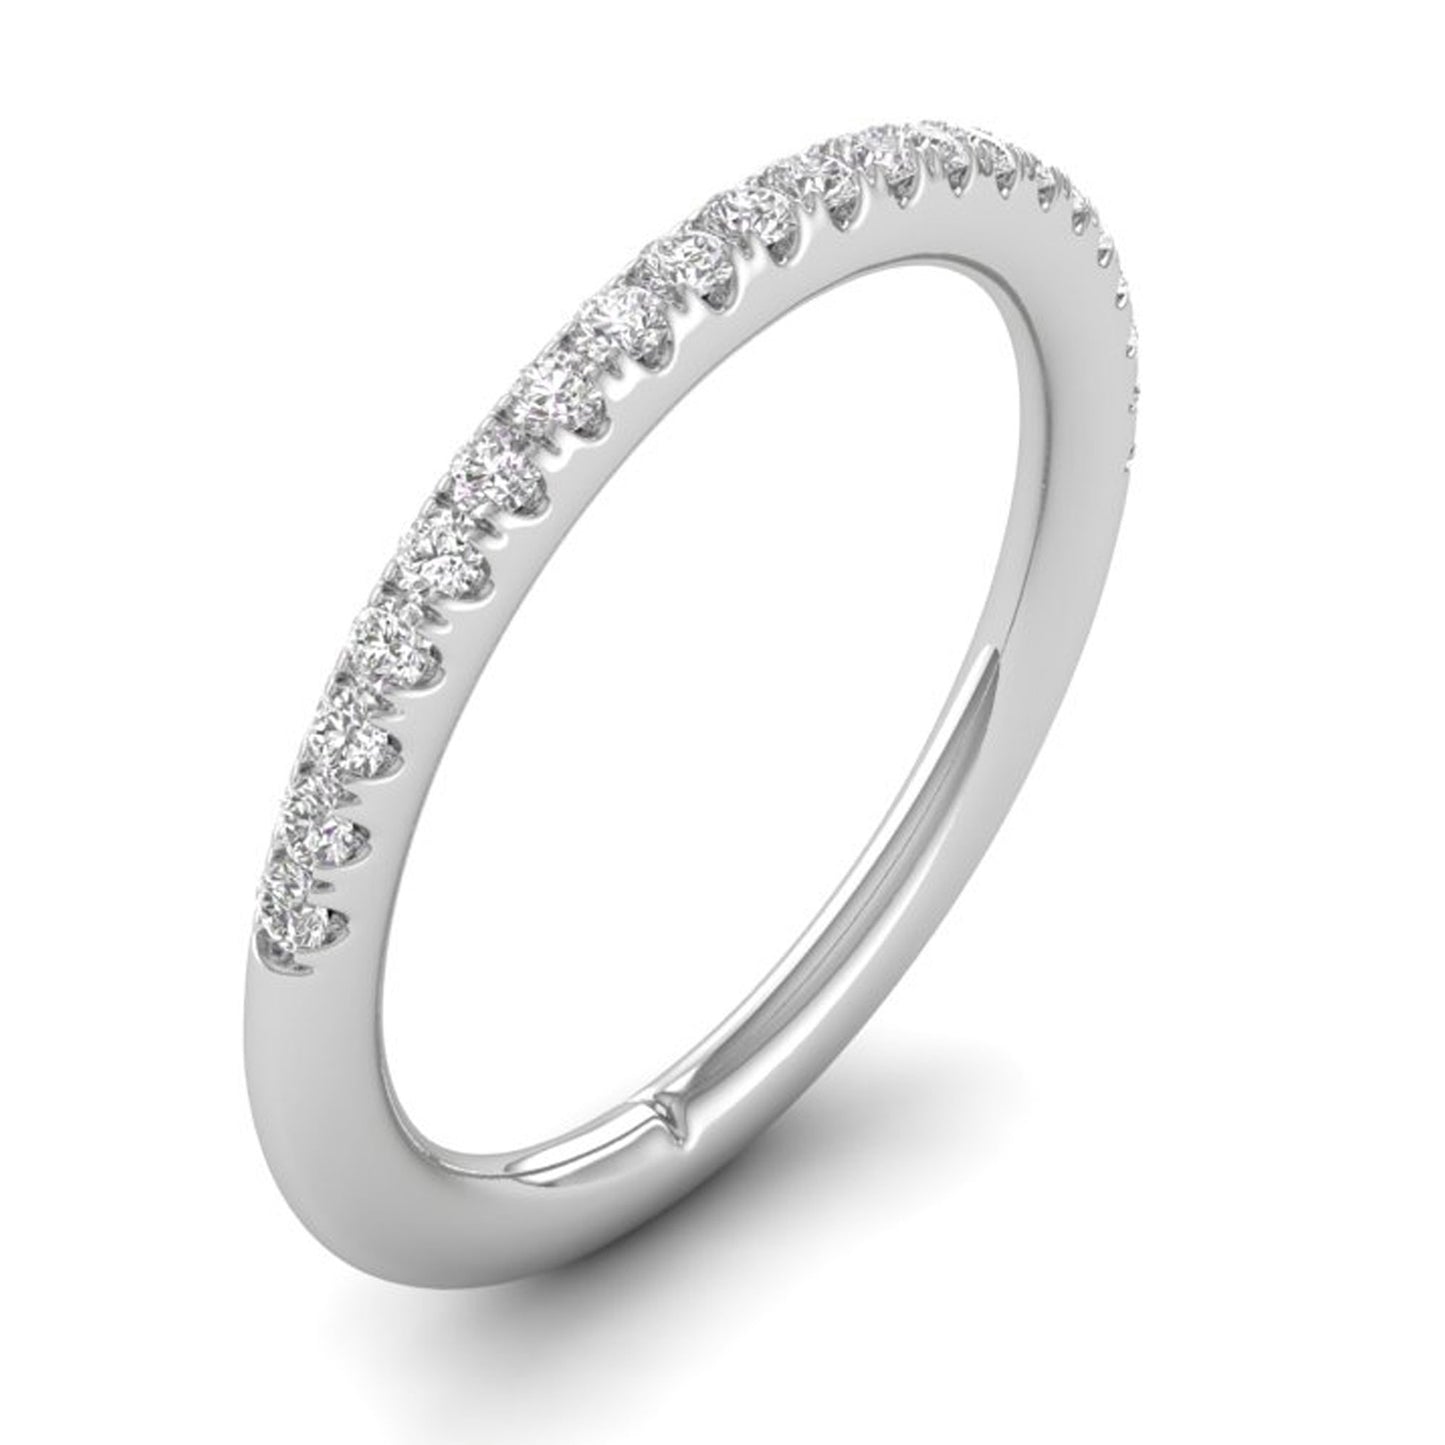 1/4 CTW COLORLESS FLAWLESS FRENCH PAVÉ WEDDING BAND